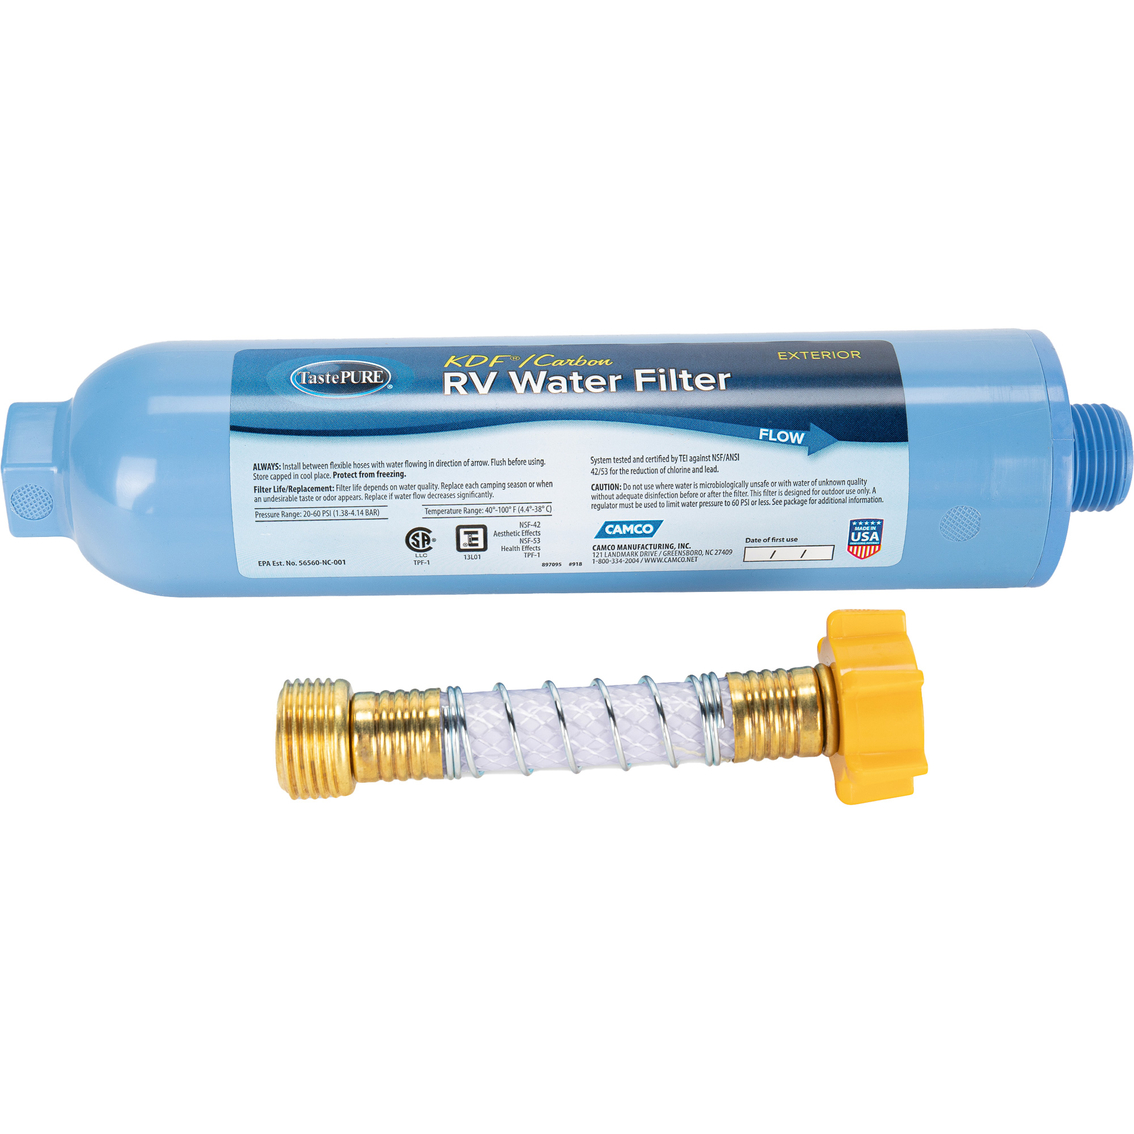 Camco Taste Pure Water Filter with Flexible Hose Protector - Image 3 of 8